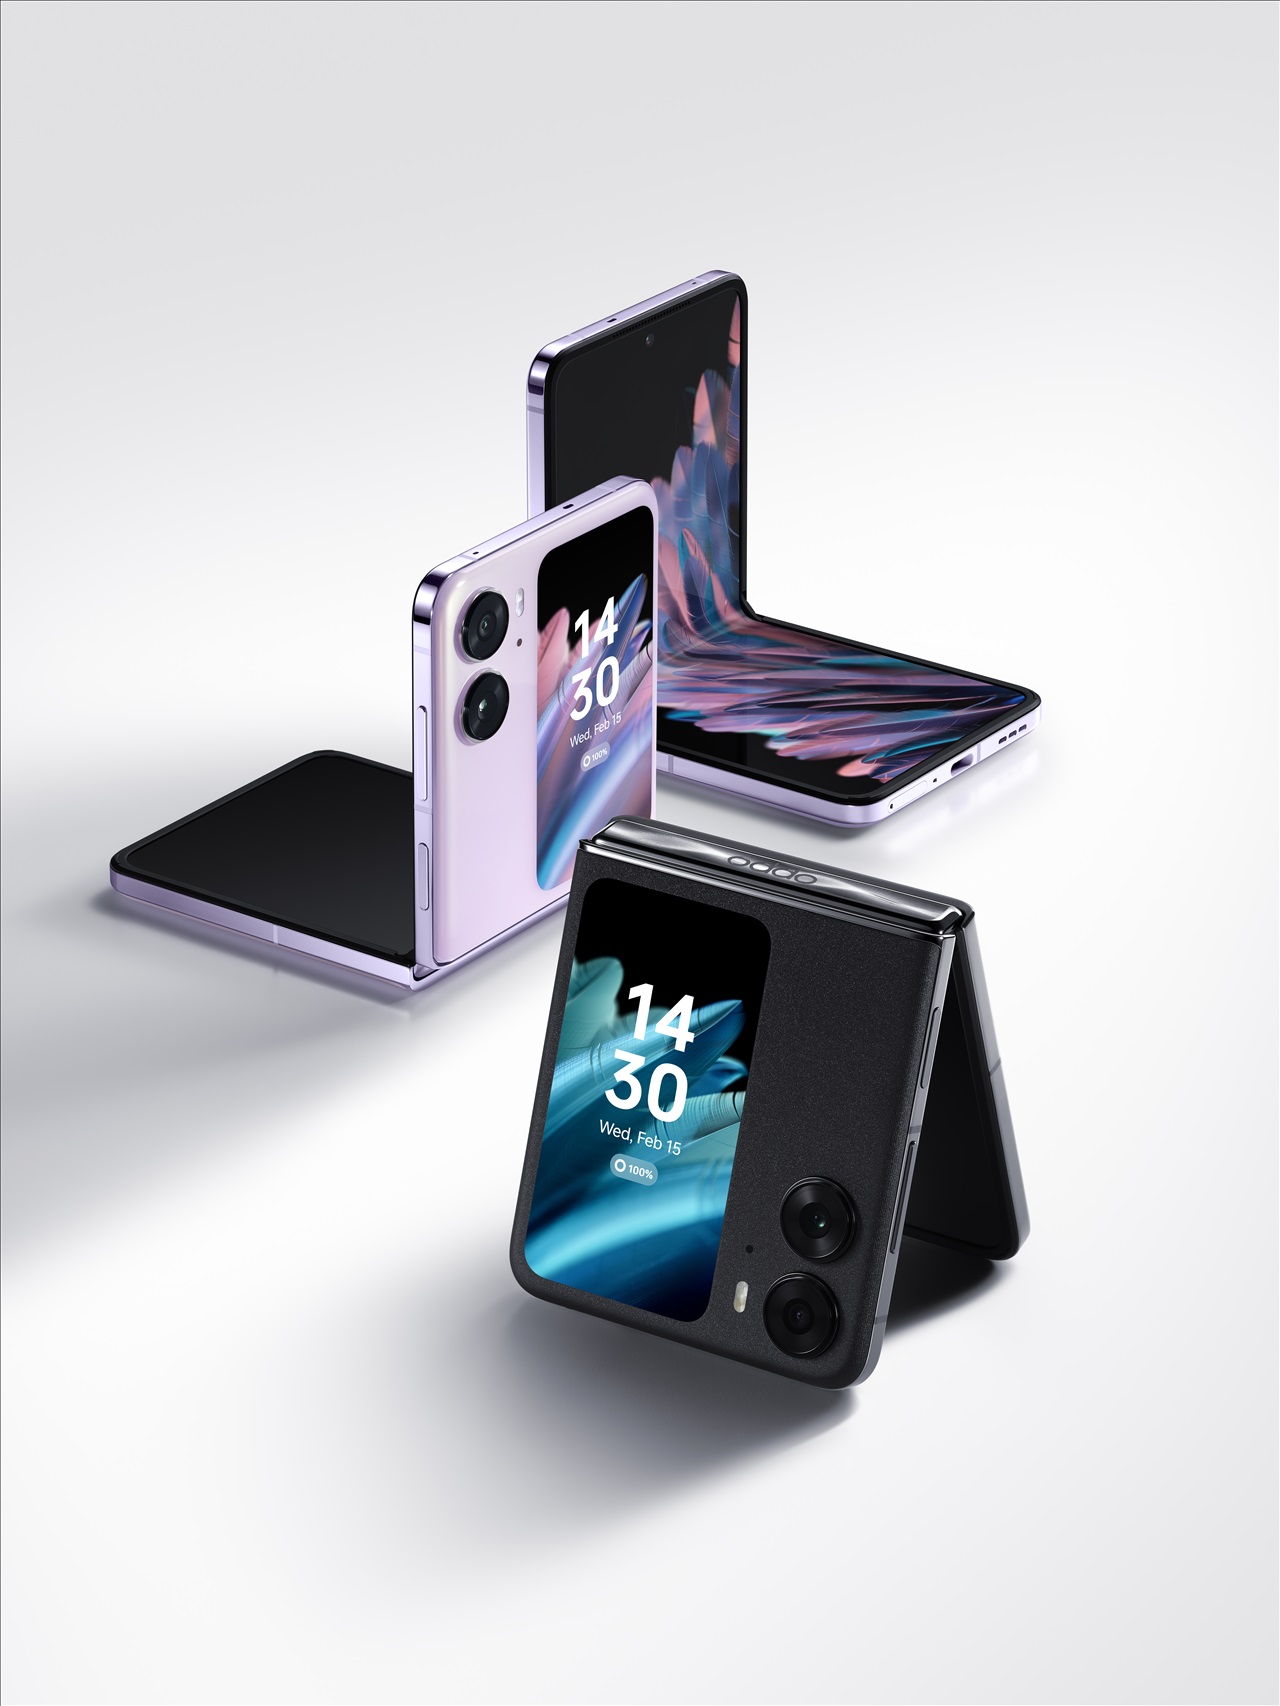 OPPO’s first foldable smartphone in Australia is here!